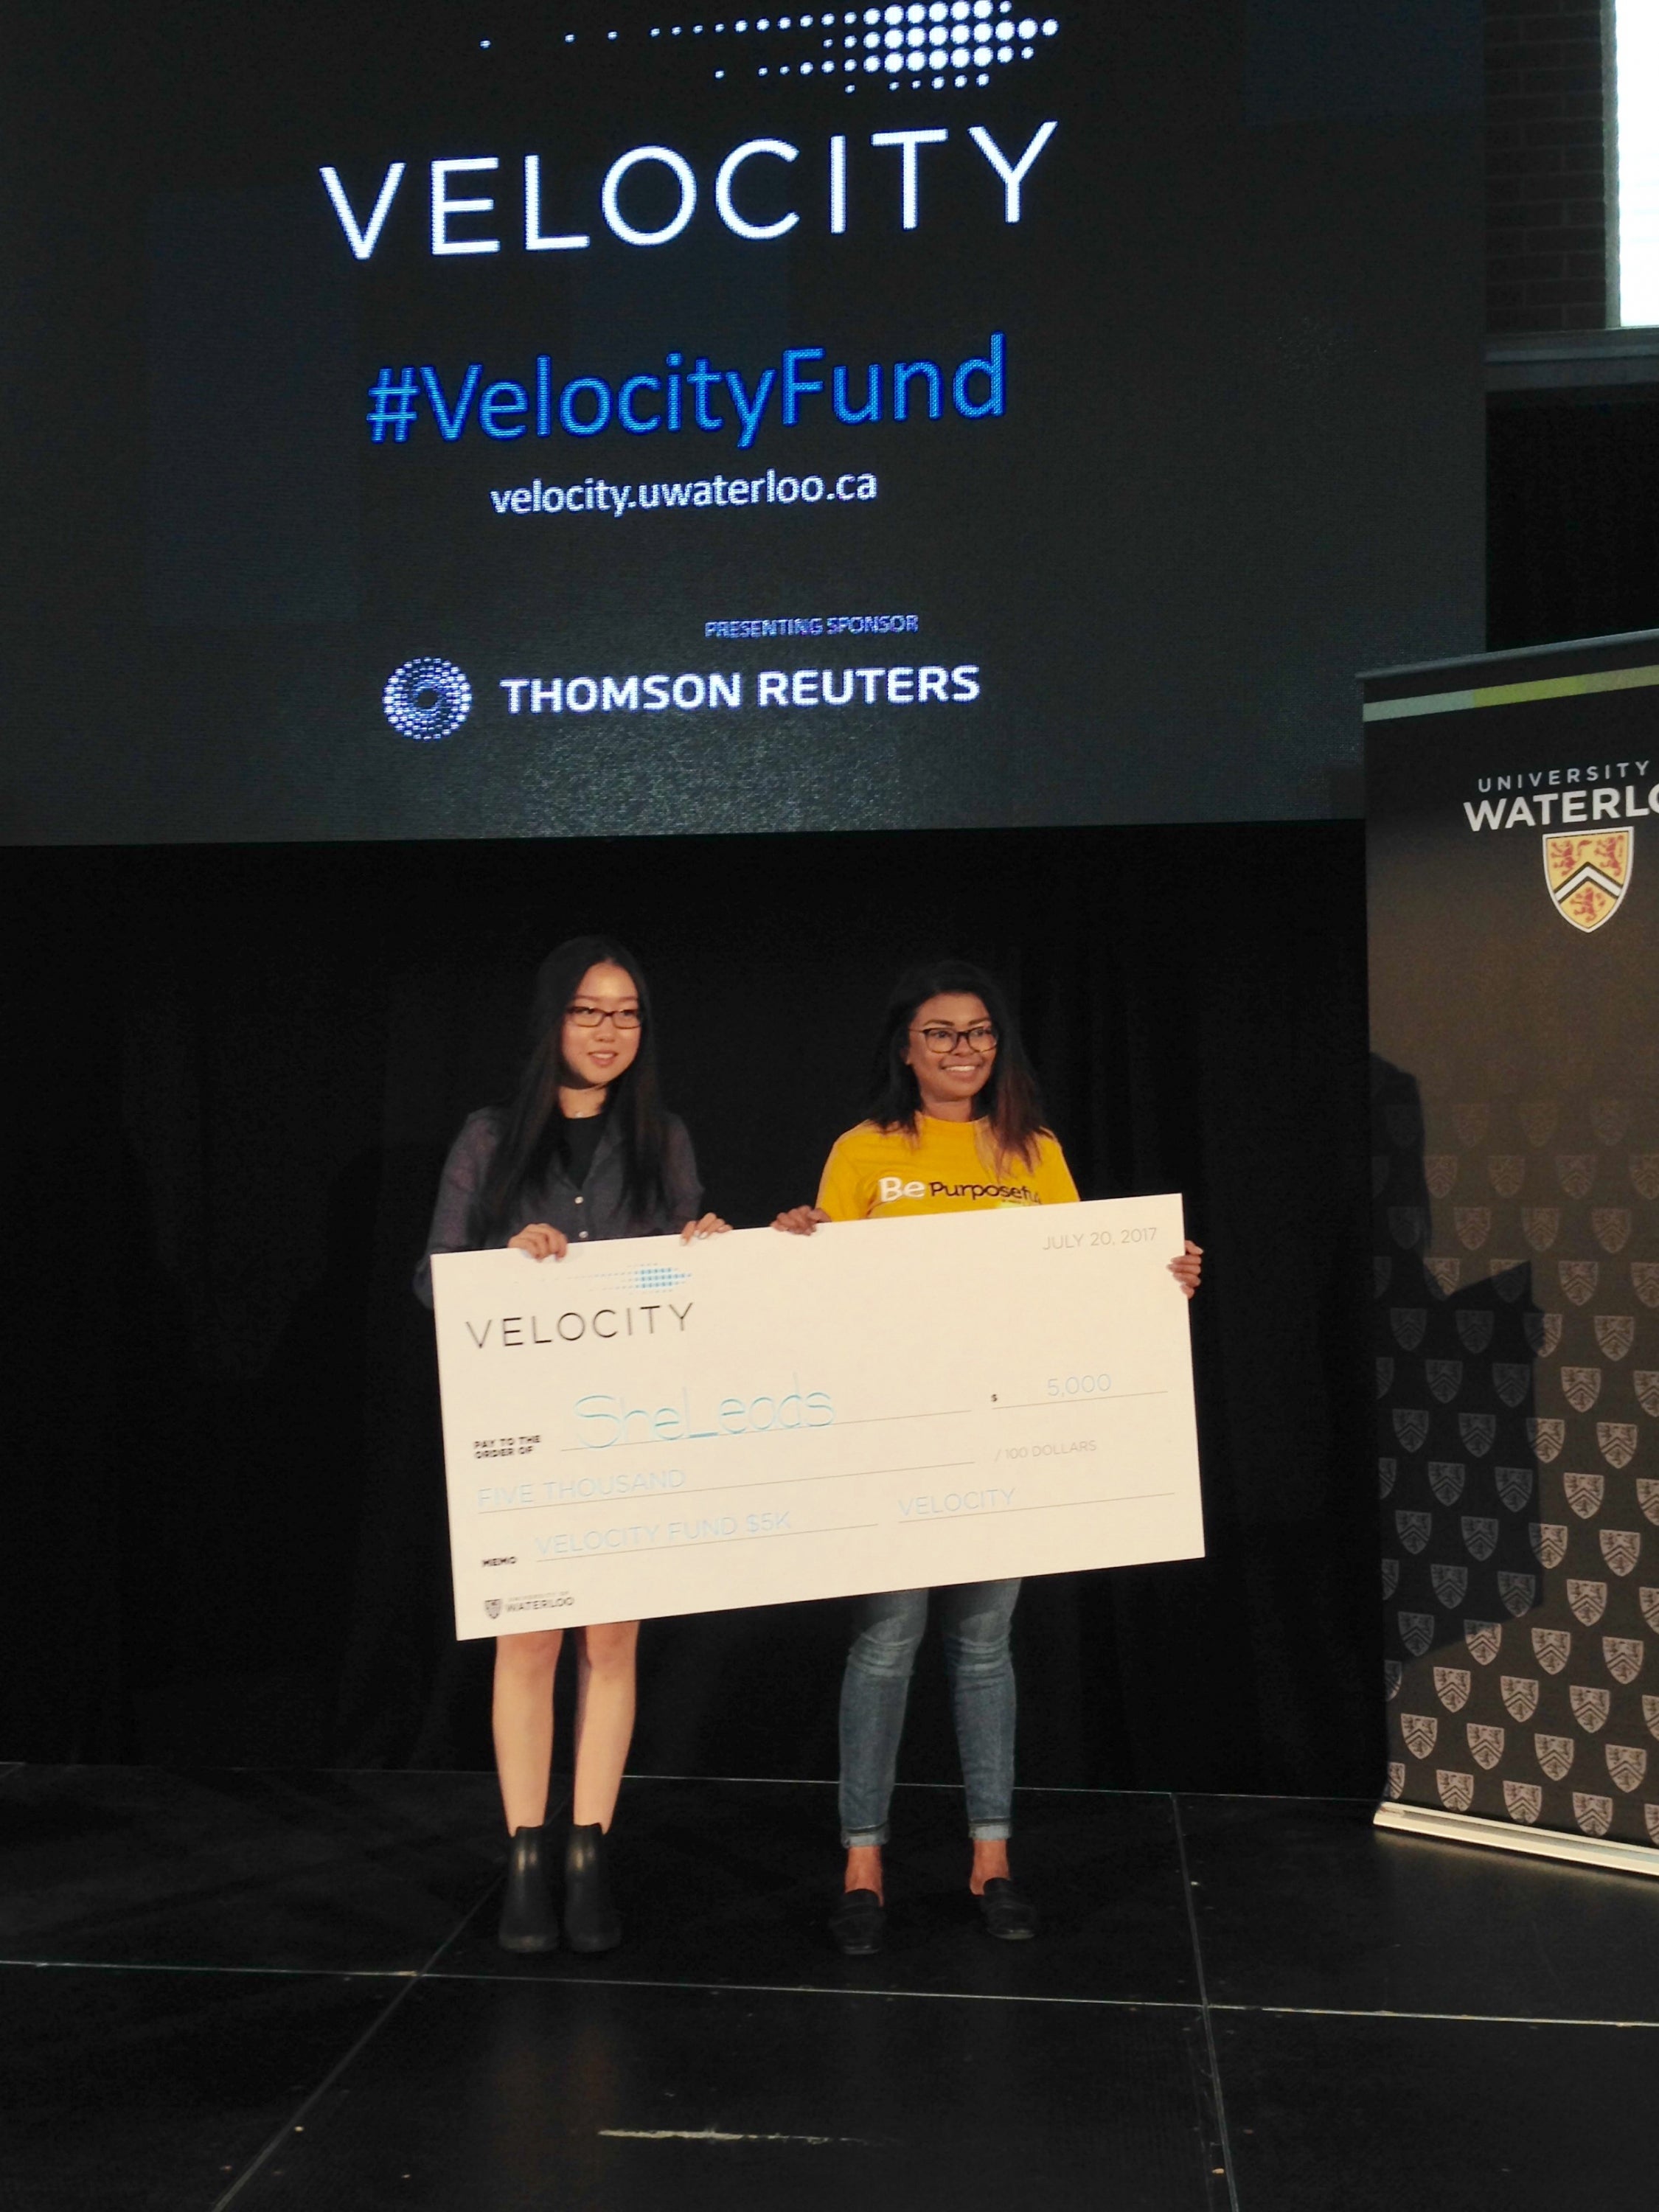 Wenqi and Cassie holding large cheque under velocity sign